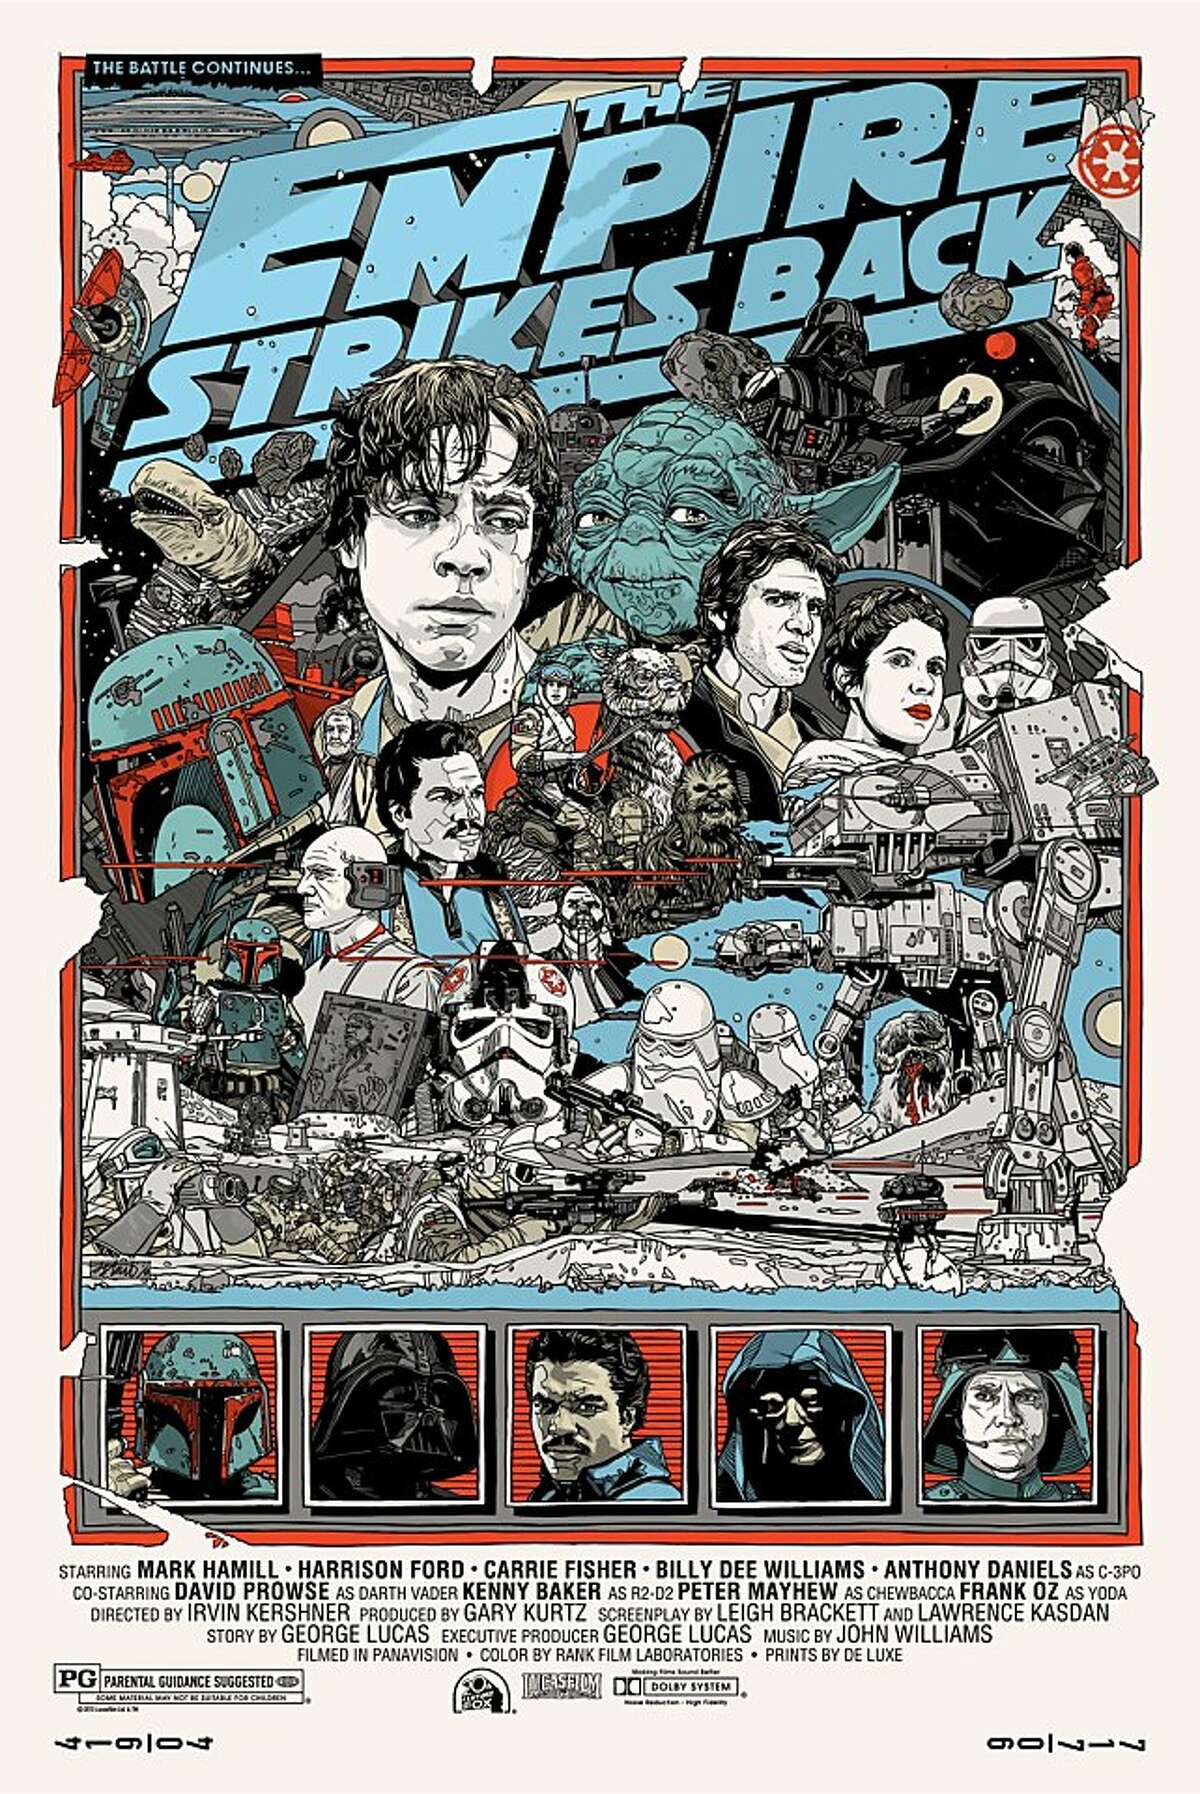 Poster from "The Empire Strikes Back," part of Mondo's "Star Wars" series.